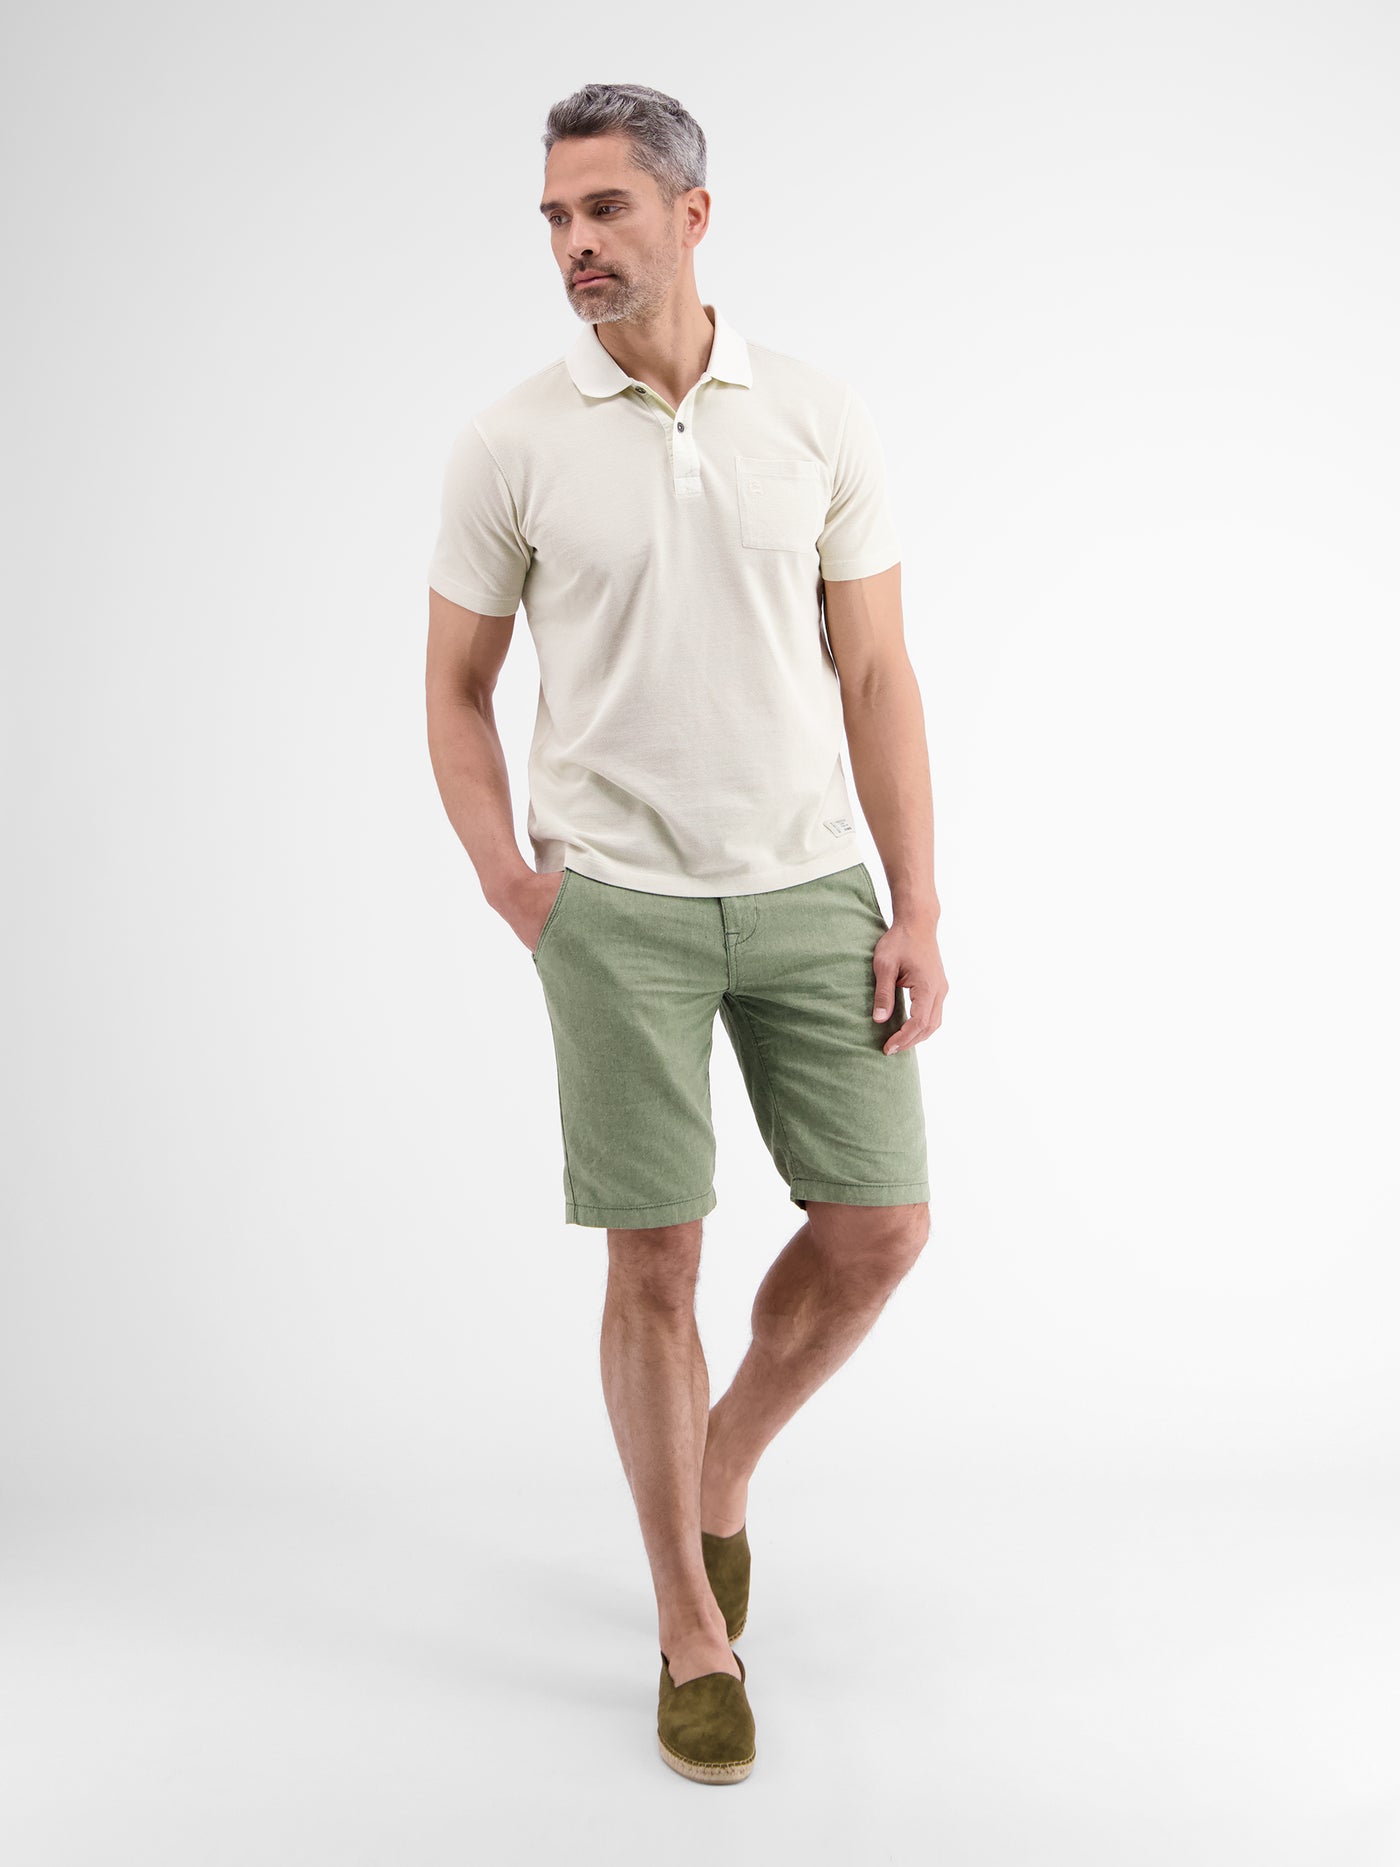 Chinos in light linen-cotton quality